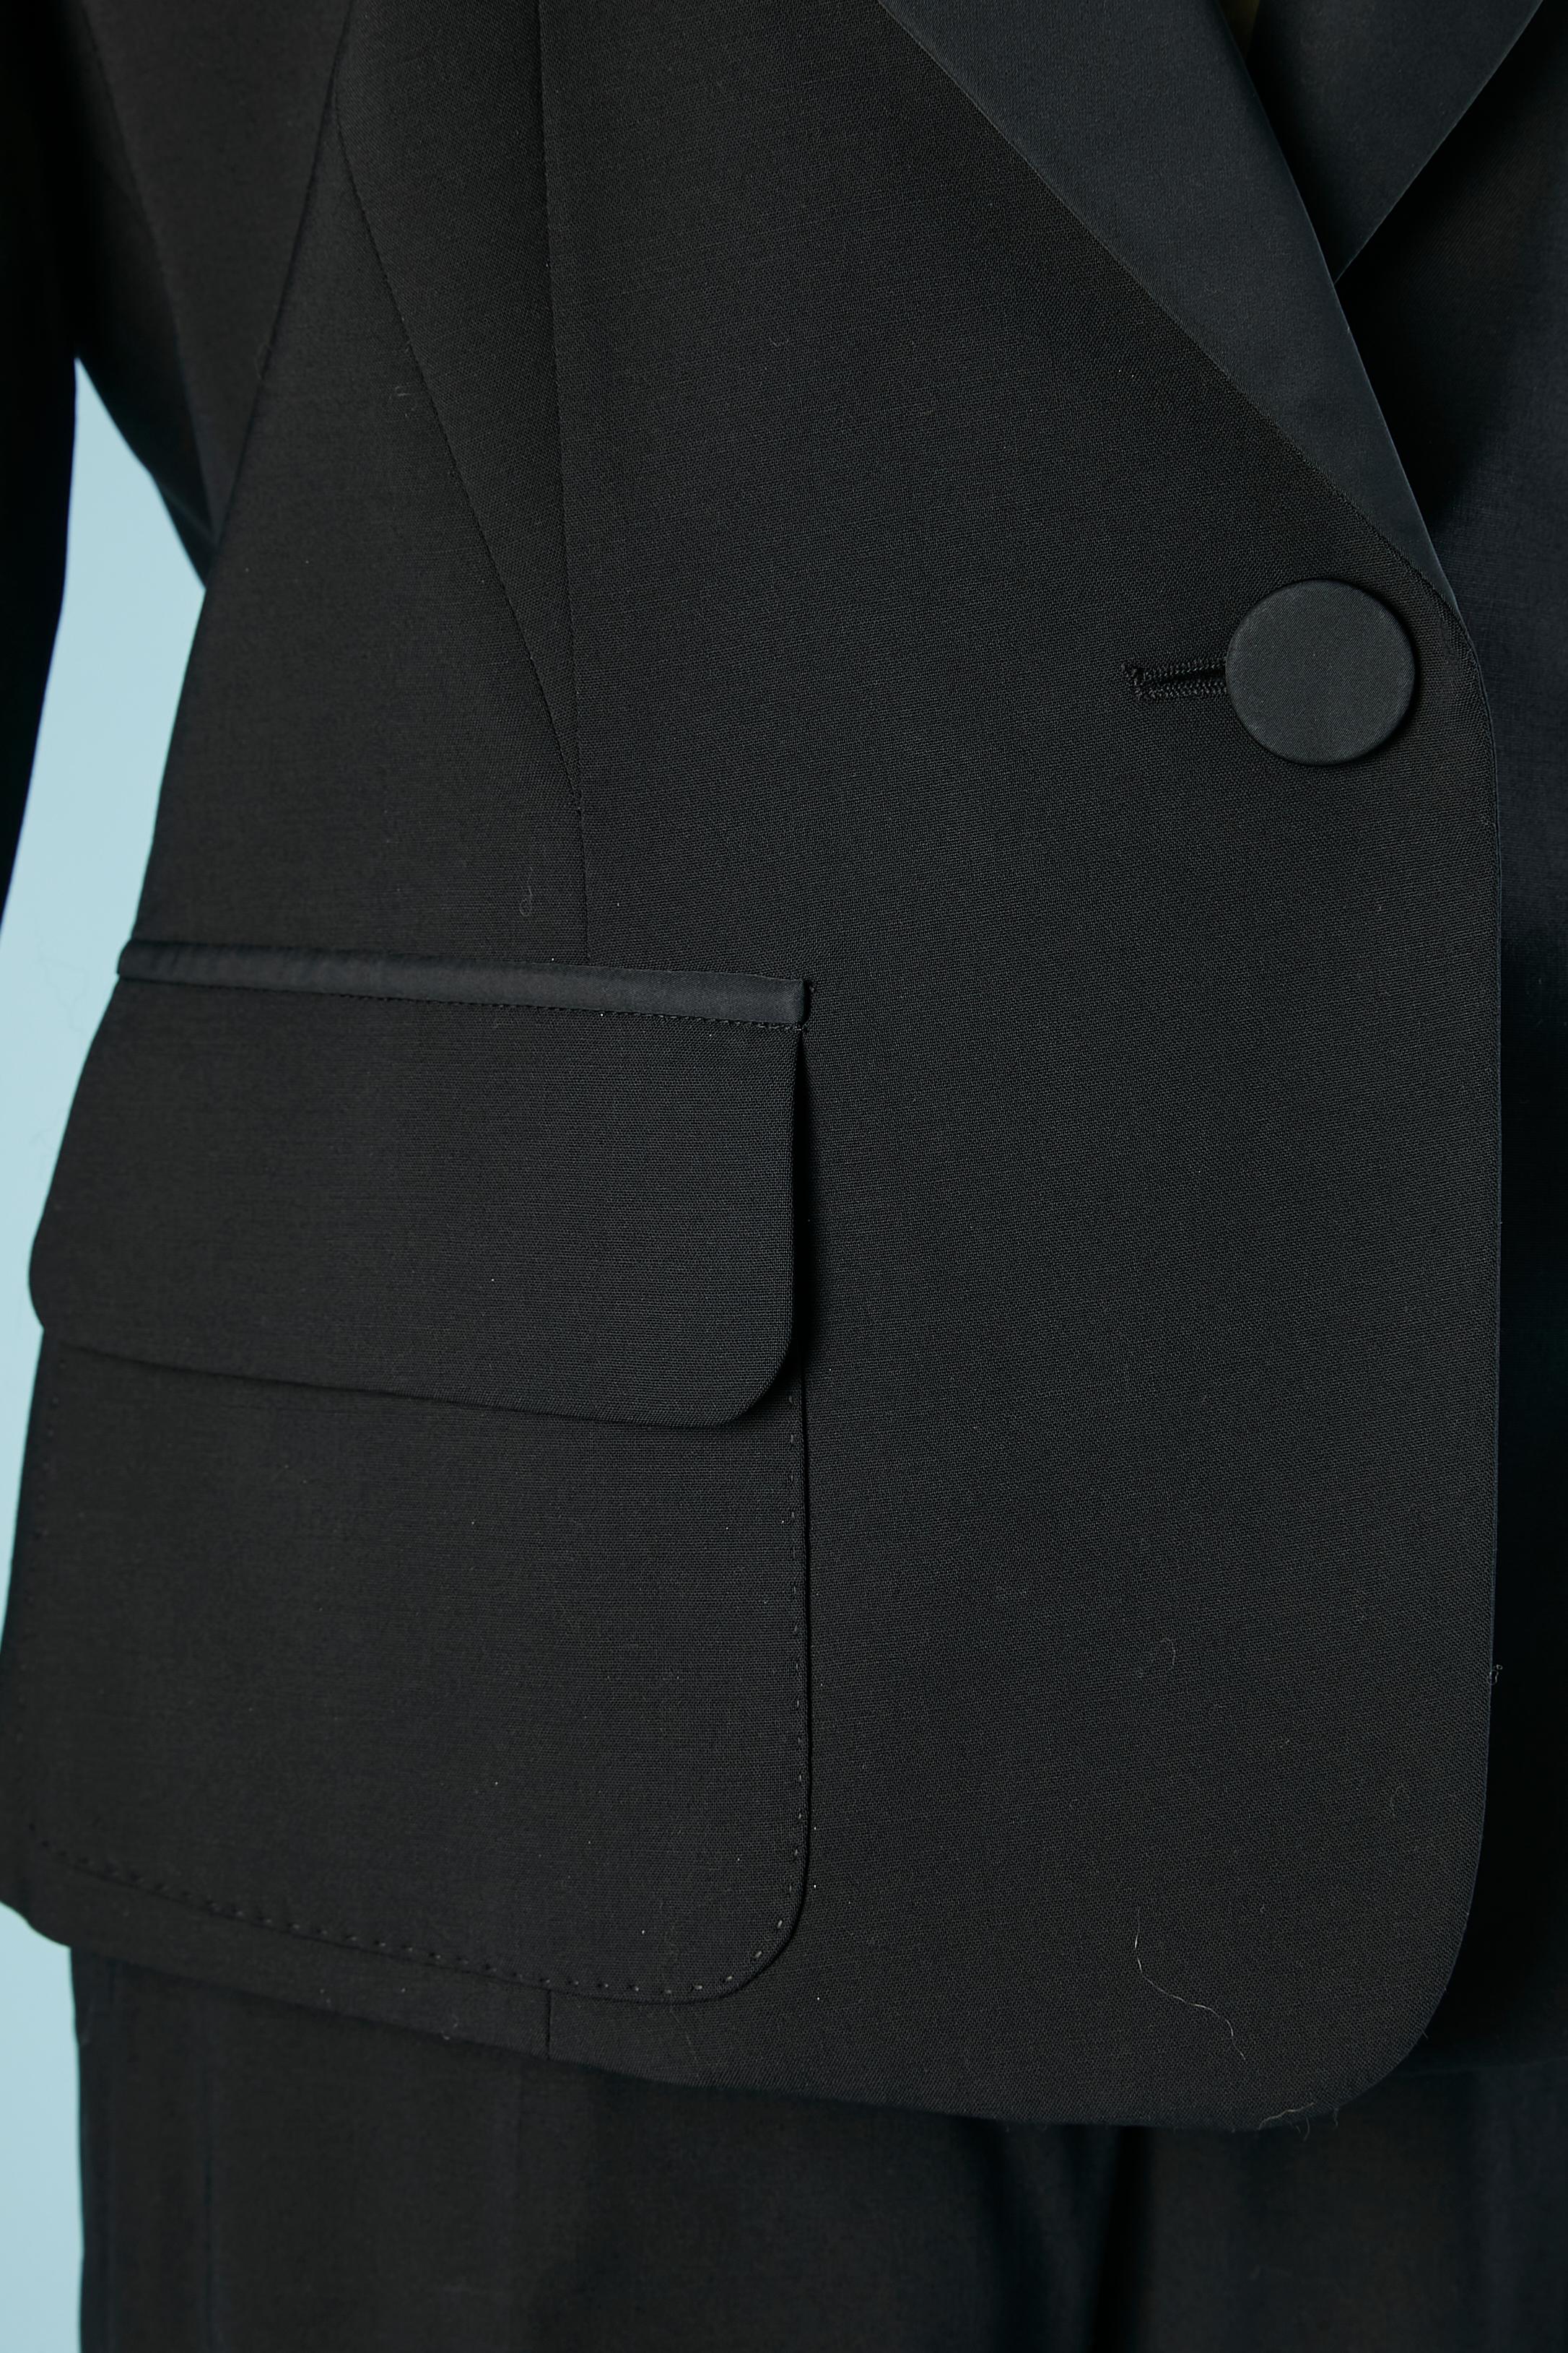 Black single-breasted tuxedo with ruffle on the cuff . Shoulder-pads. Fabric buttons. Top-stitched pockets. Branded silk lining. Fabric composition: 74% wool, 16% polyamide, 7% silk, 3% stretch. Buttons and buttonhole on the bottom side of the